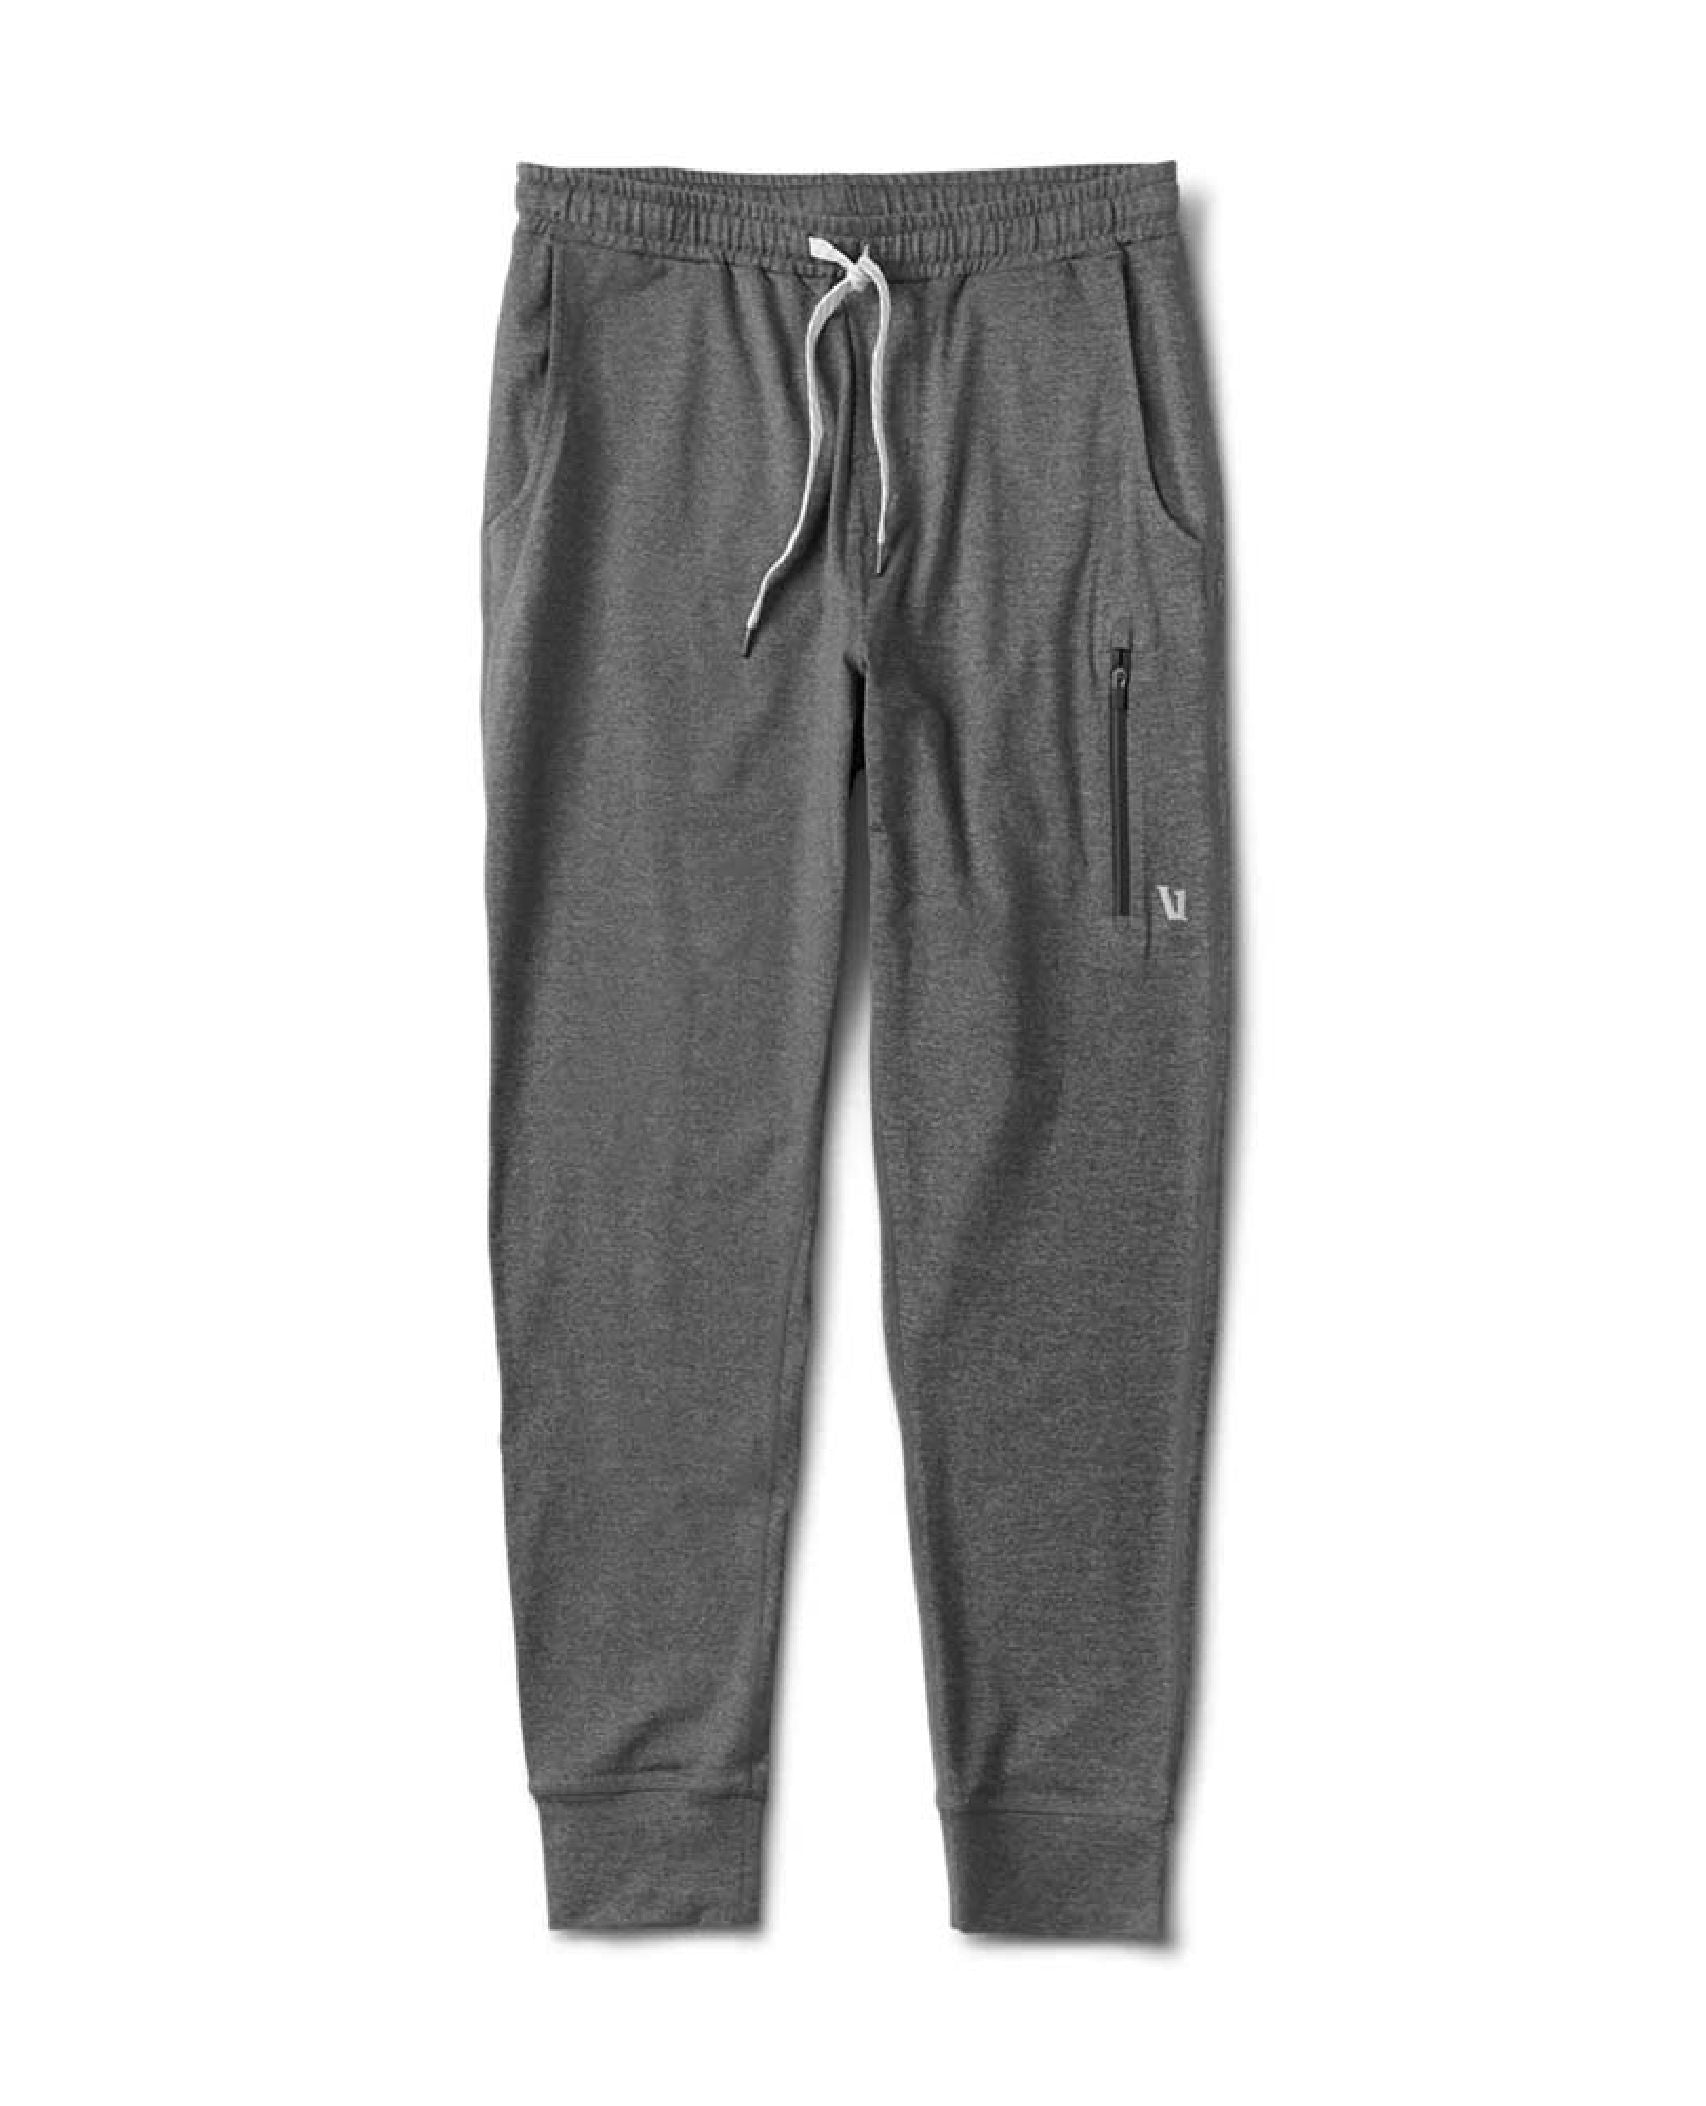 Around The Clock Jogger - Charcoal